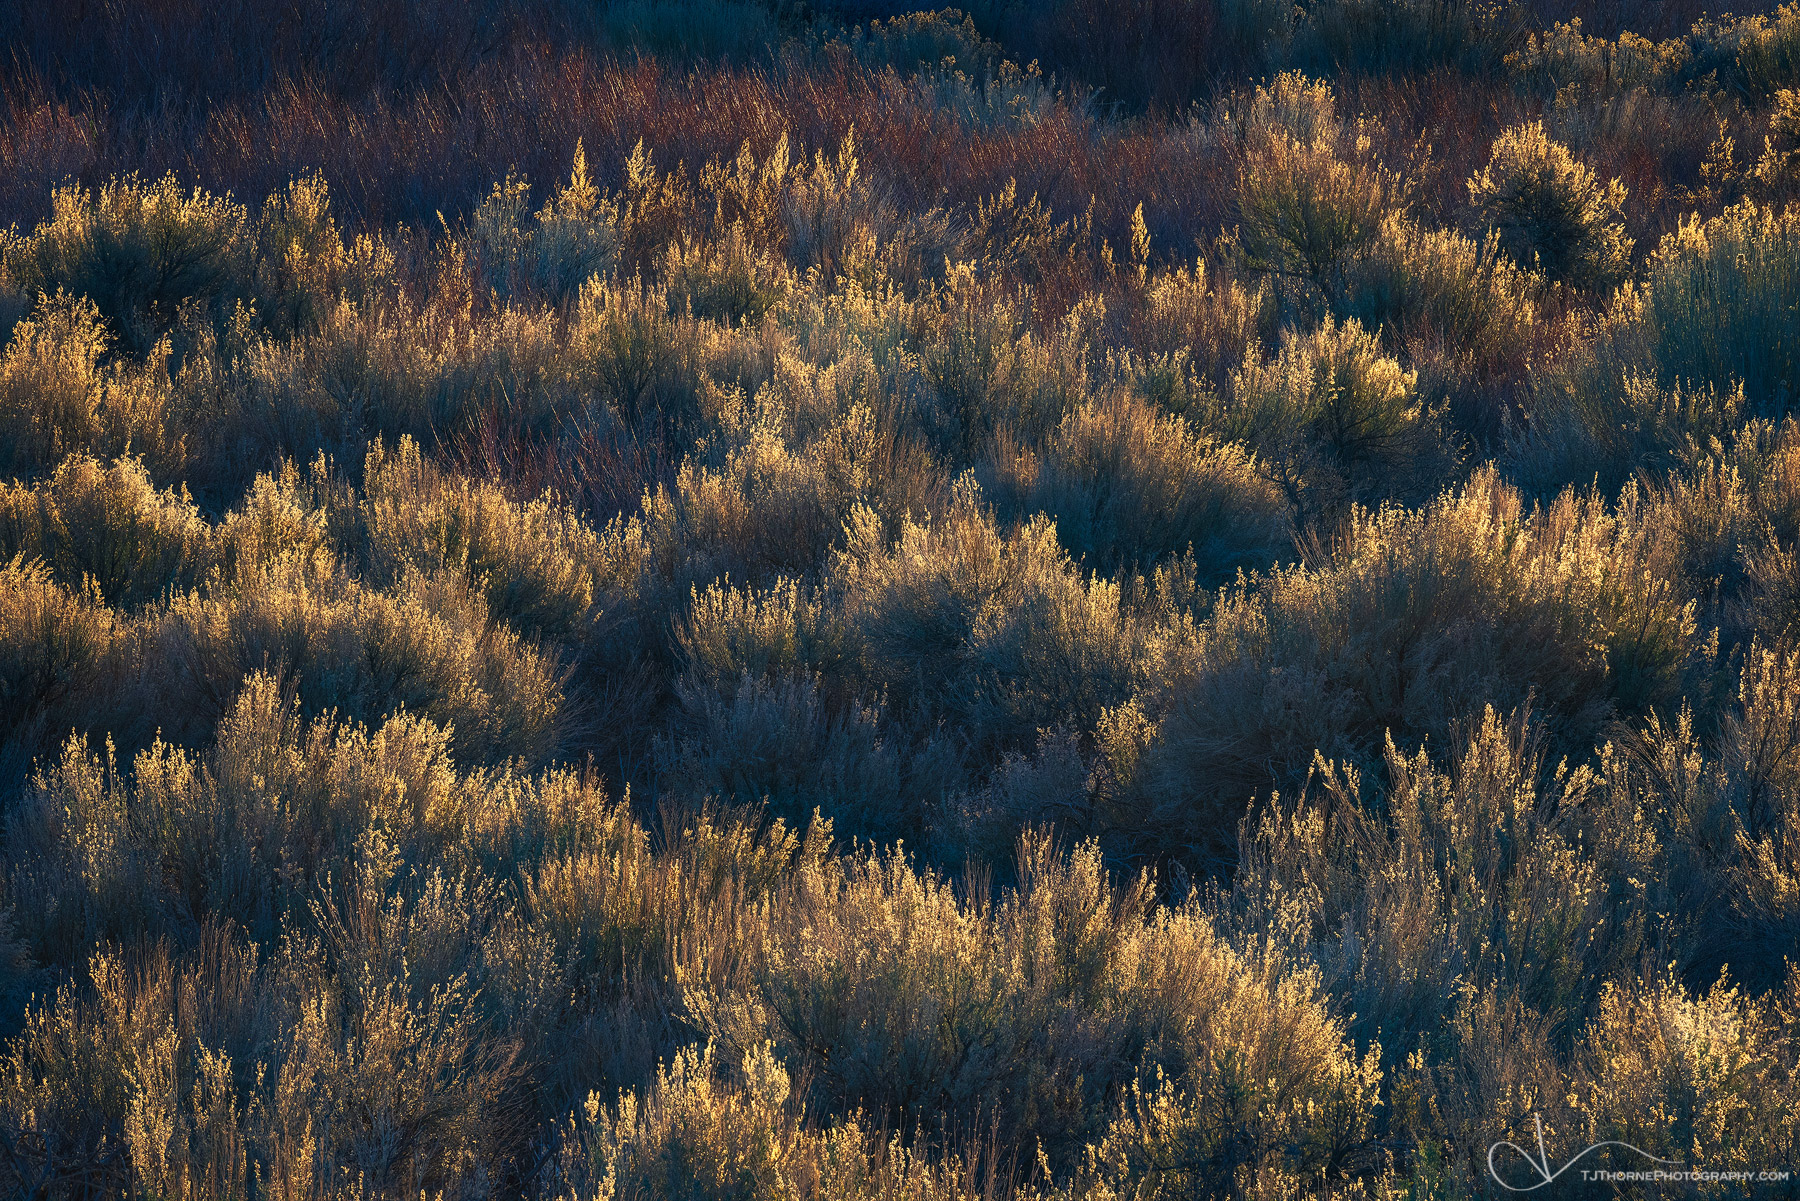 Desert brush is illuminated by early morning light in the Owens River Valley in California.